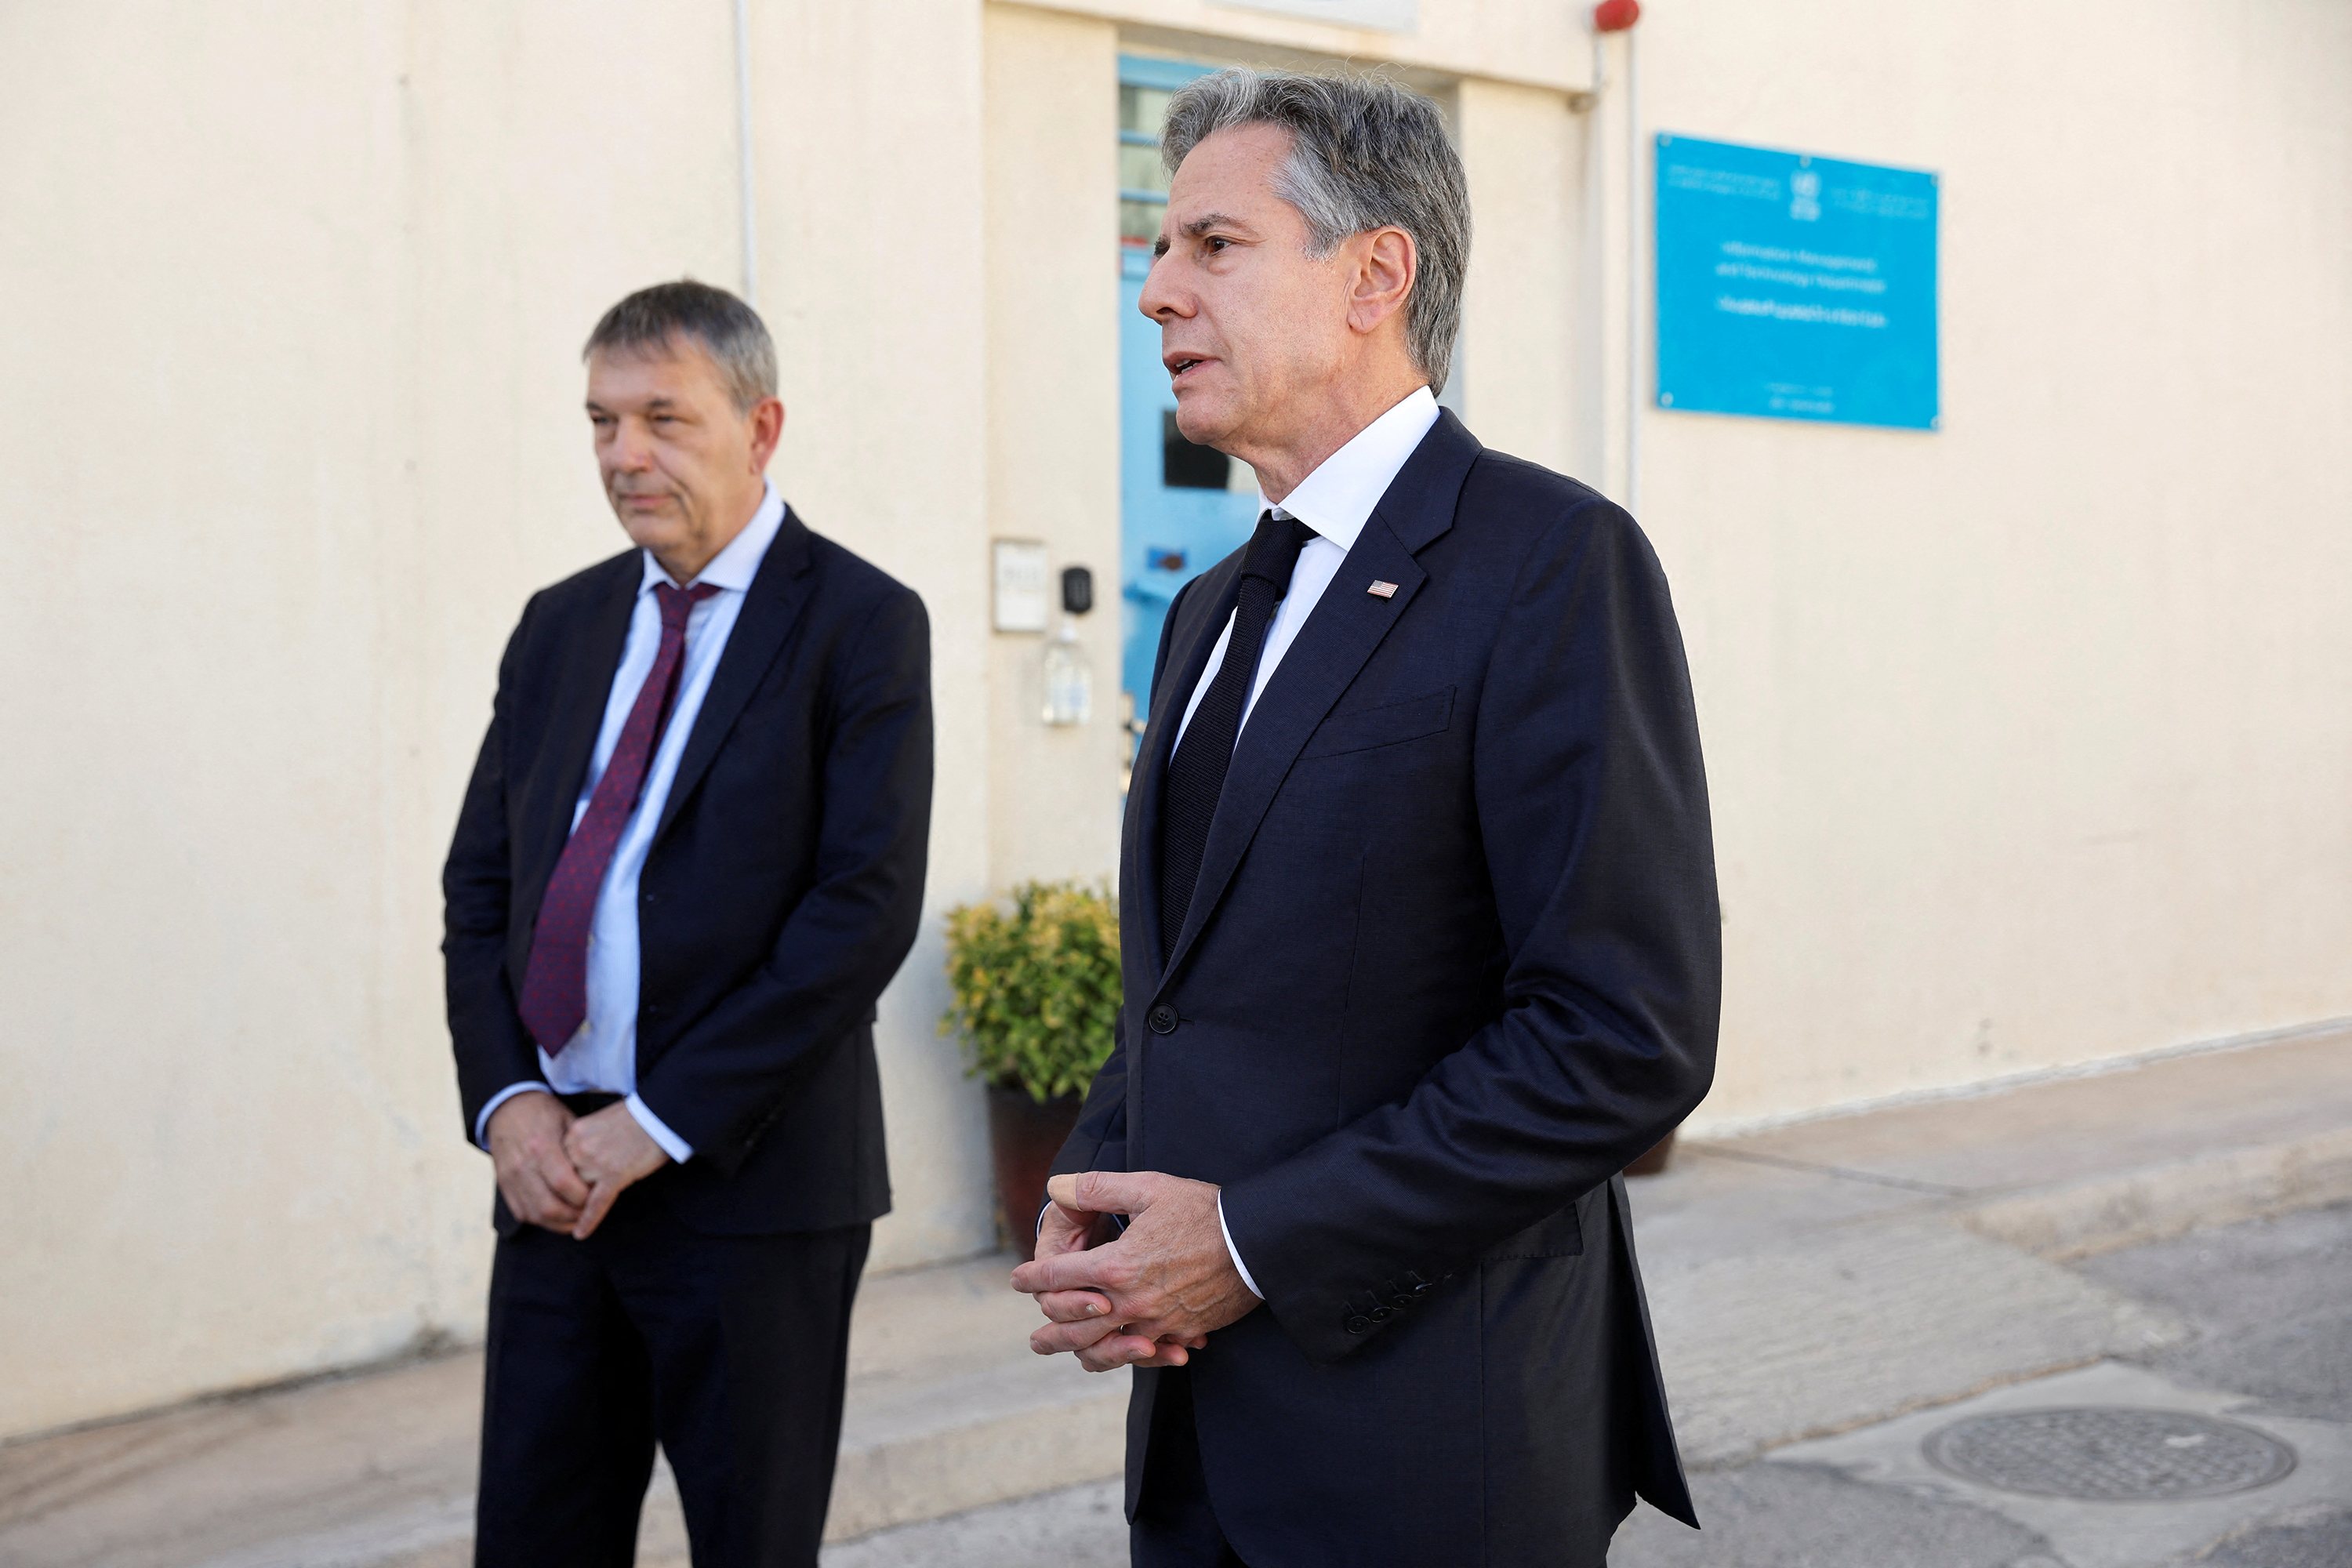 US Secretary of State Antony Blinken, right, meets with United Nations Relief and Works Agency for Palestine Refugees in the Near East Commissioner Philippe Lazzarini in Amman, Jordan, on November 4. 